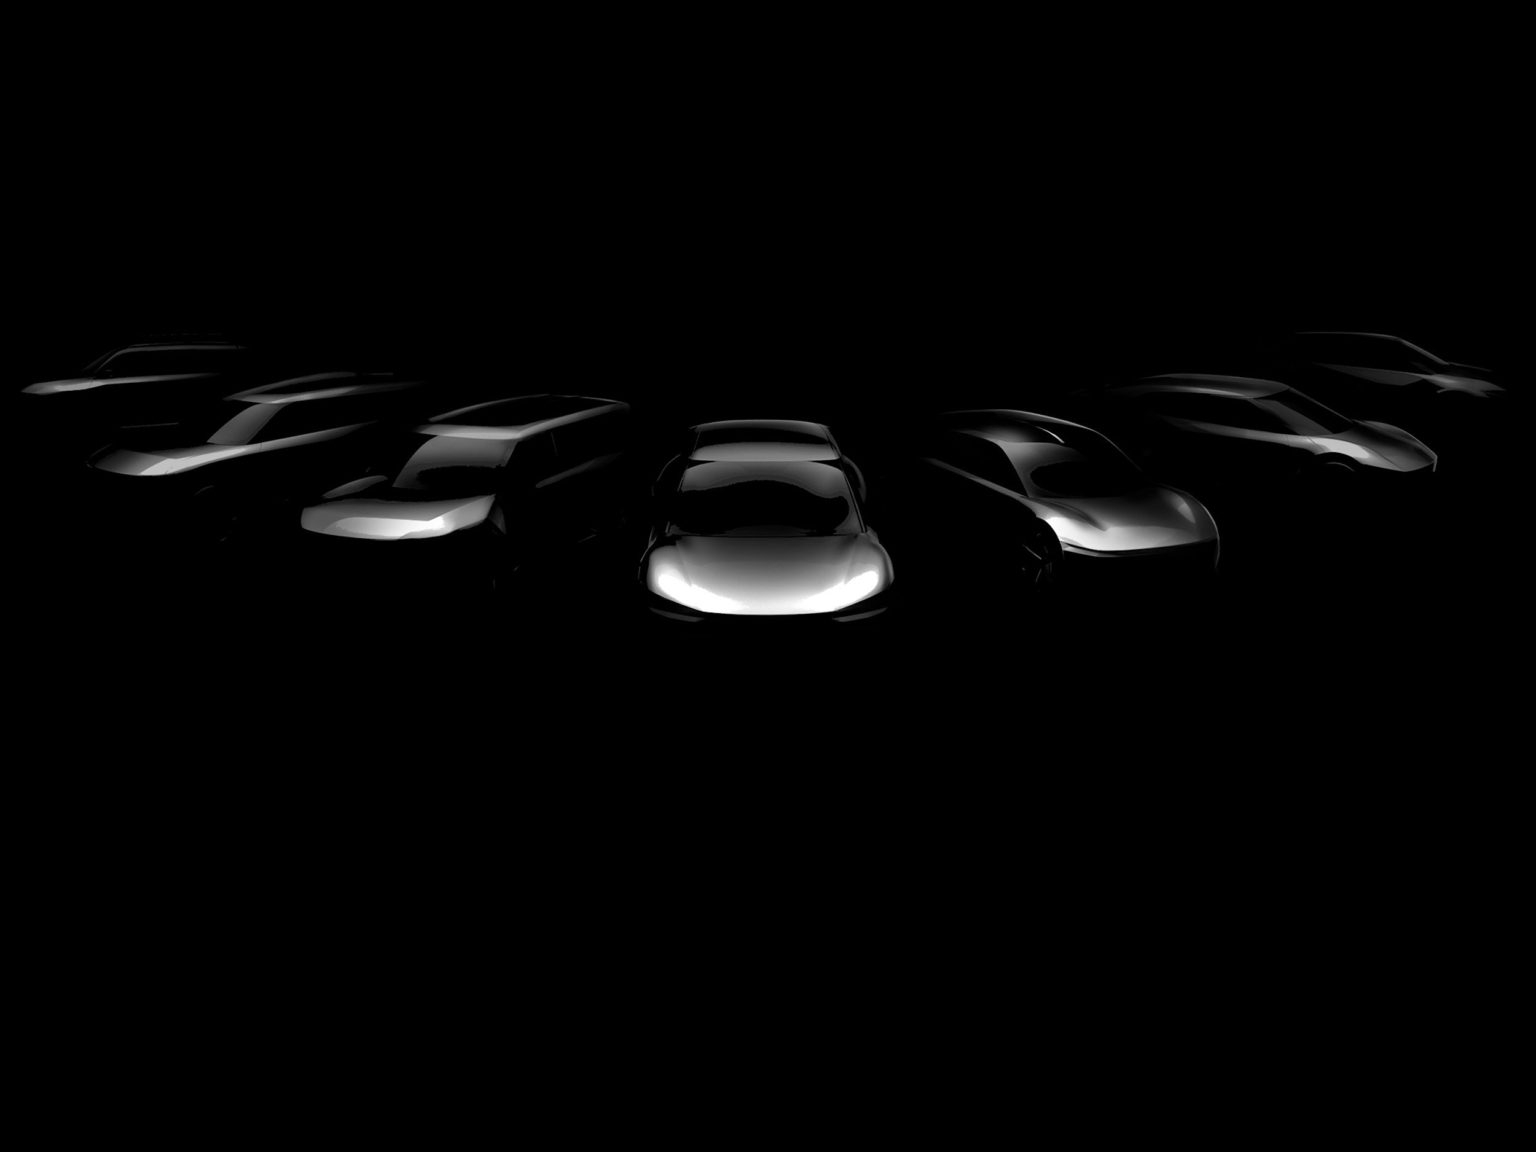 The teaser image of the 2027 Kia lineup includes numerous cars and SUVs.